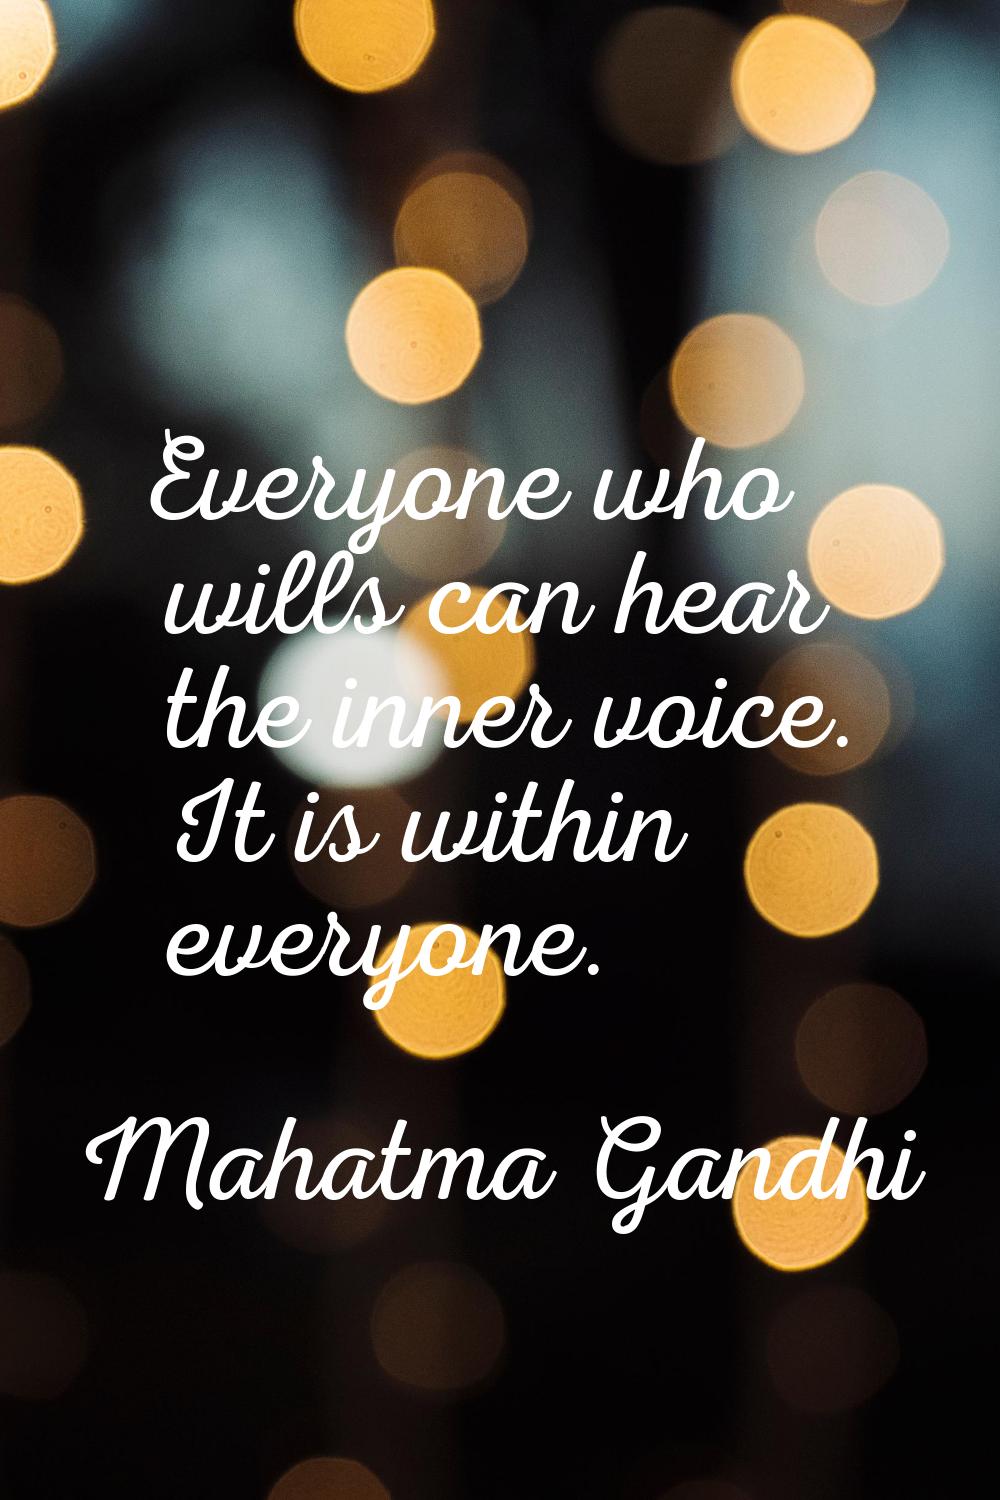 Everyone who wills can hear the inner voice. It is within everyone.